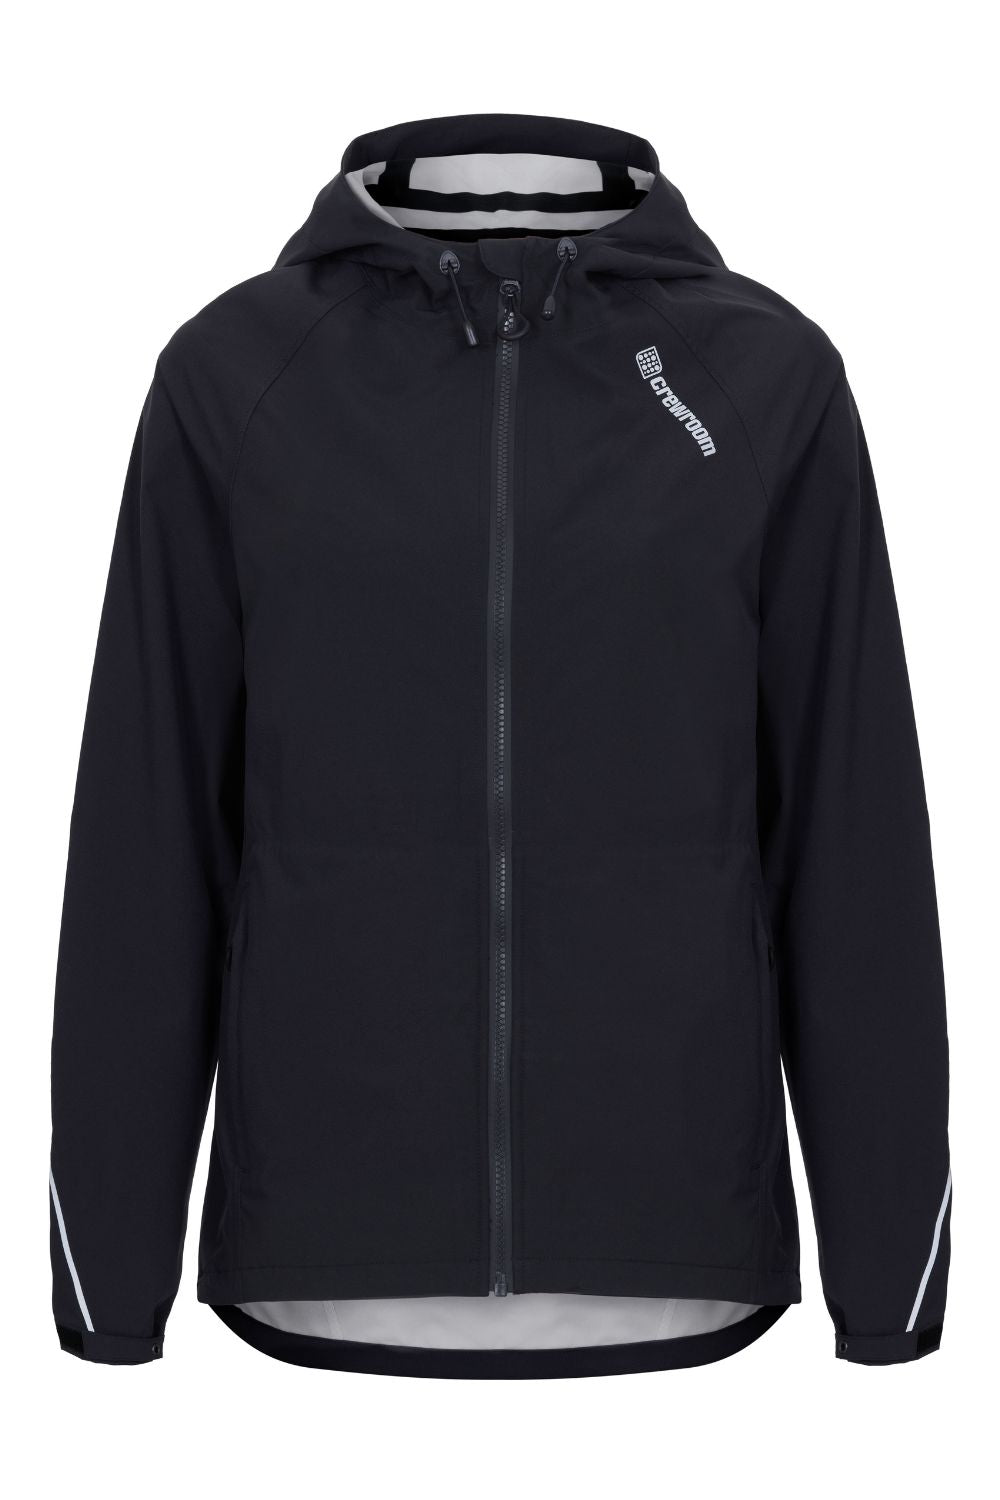 The Torrential Hooded Jacket (Women's)